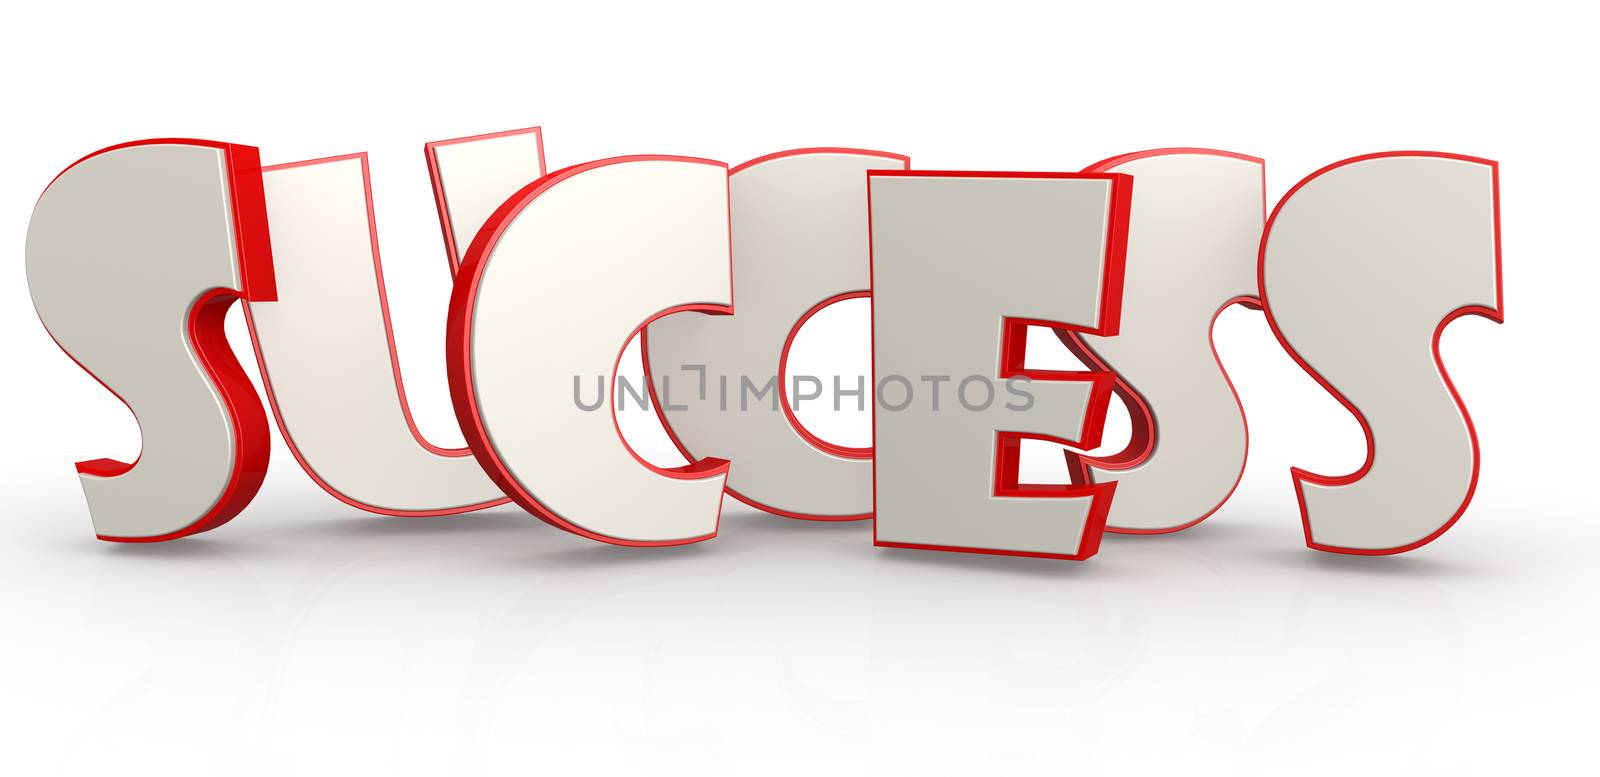 Success word with white background image with hi-res rendered artwork that could be used for any graphic design.